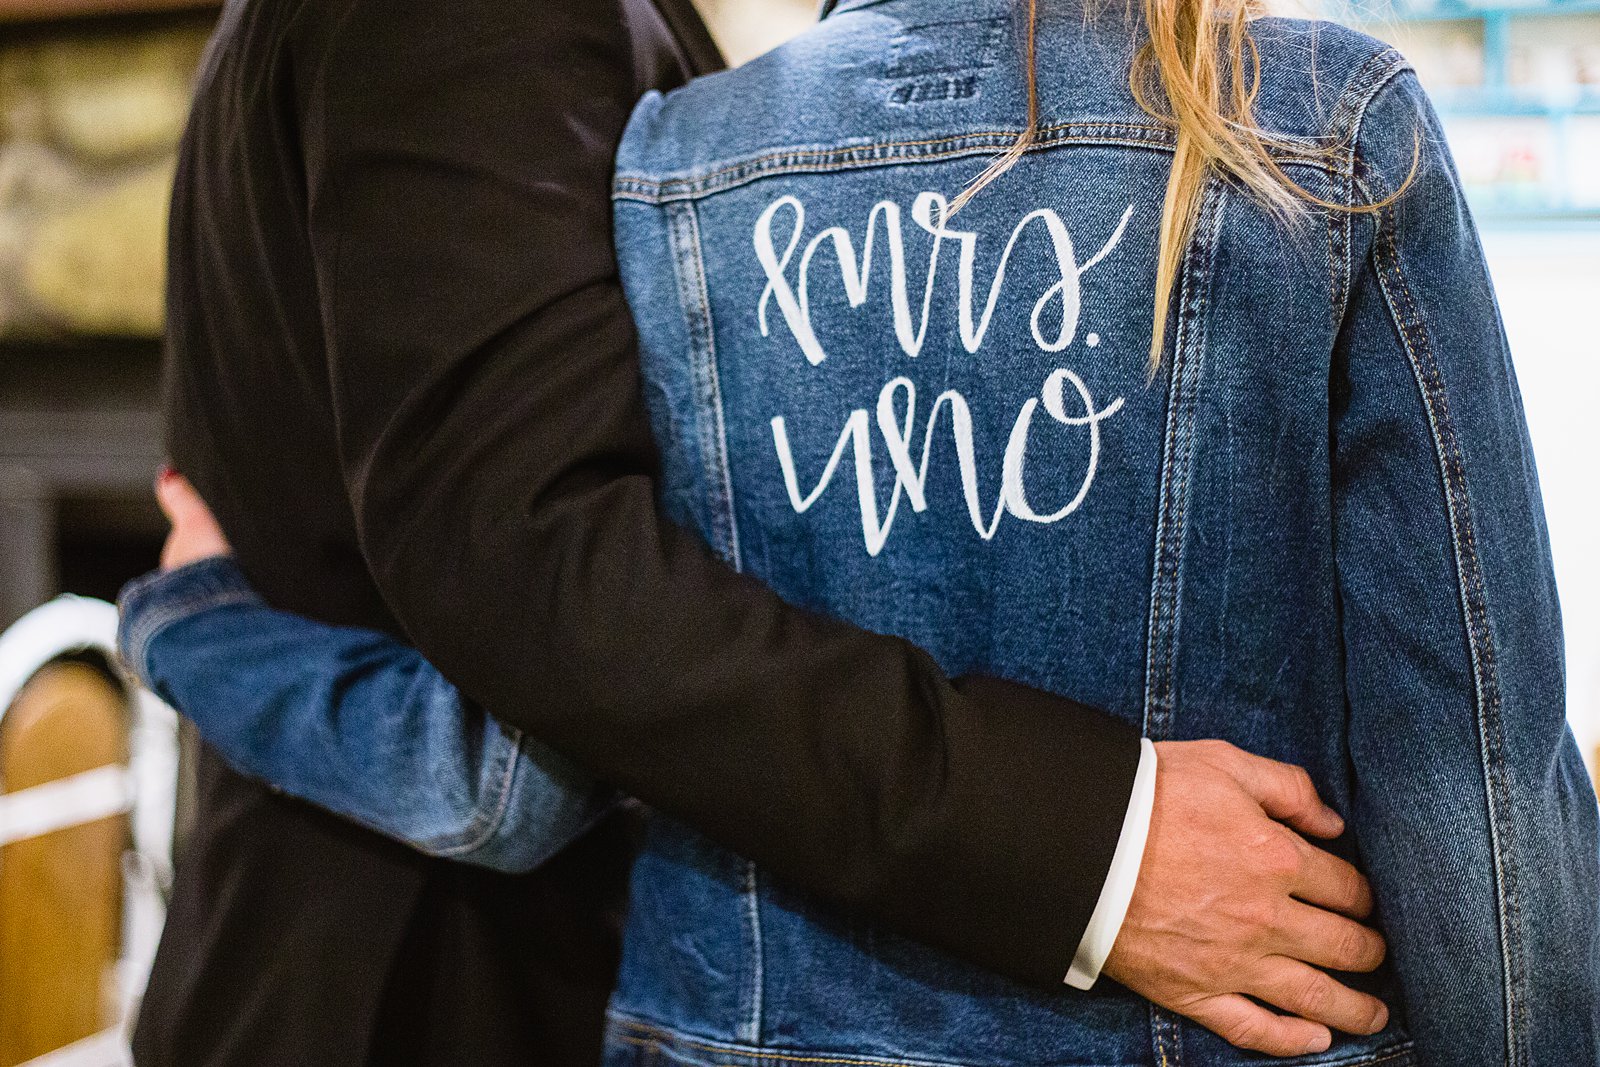 Bride's custom Mrs. jeans jacket at her reception by PMA Photography.